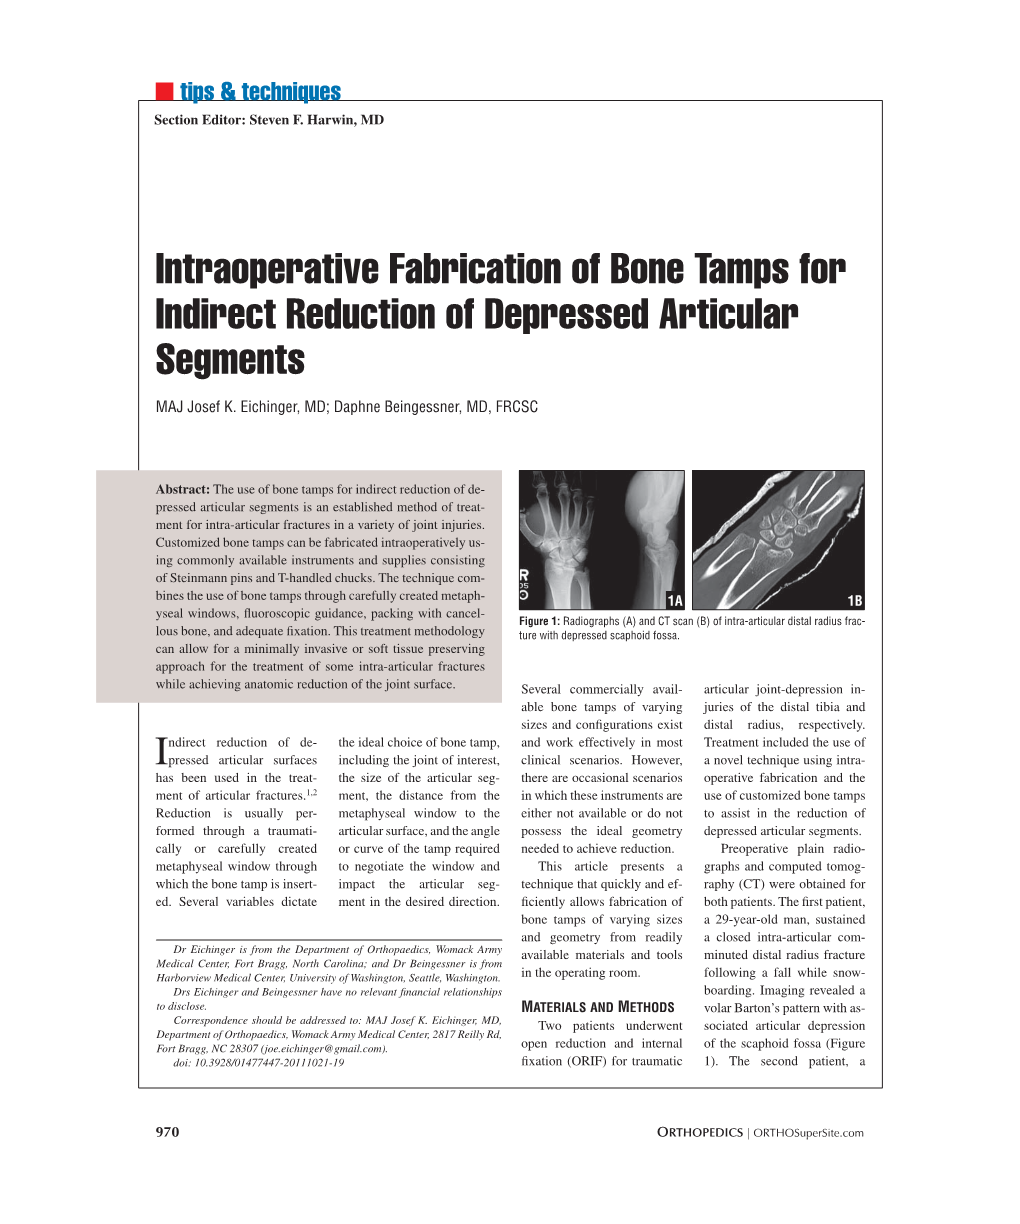 Intraoperative Fabrication of Bone Tamps for Indirect Reduction of Depressed Articular Segments